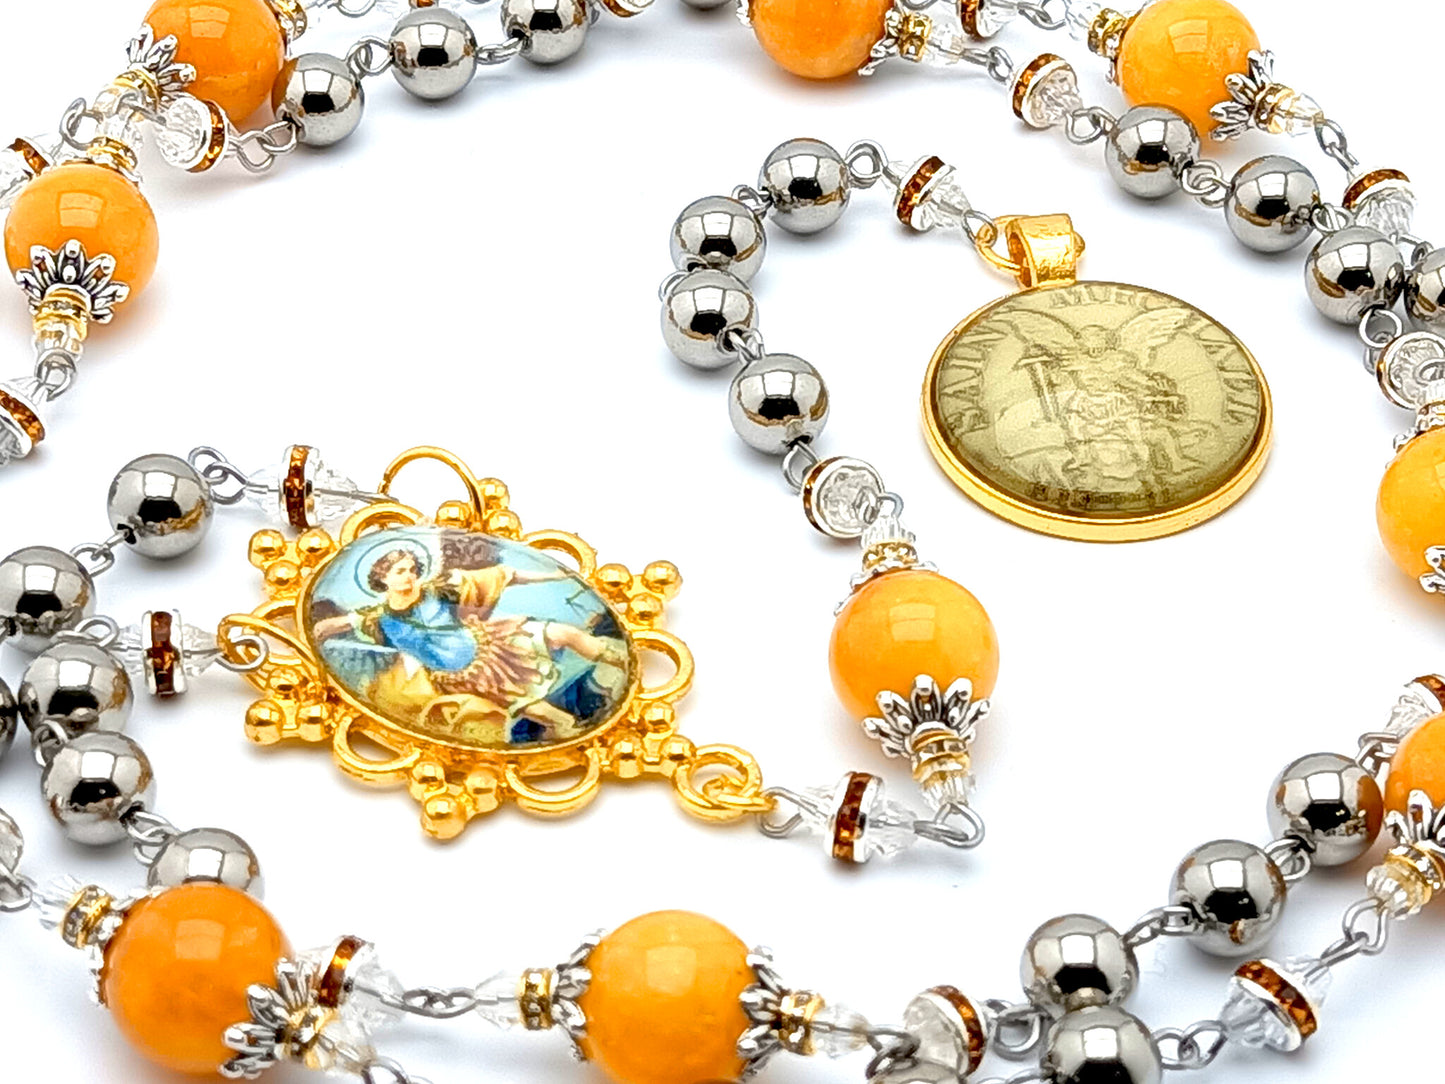 Saint Michael unique rosary beads prayer chaplet with stainless steel and yellow jade gemstone beads and domed Saint Michael picture medal.